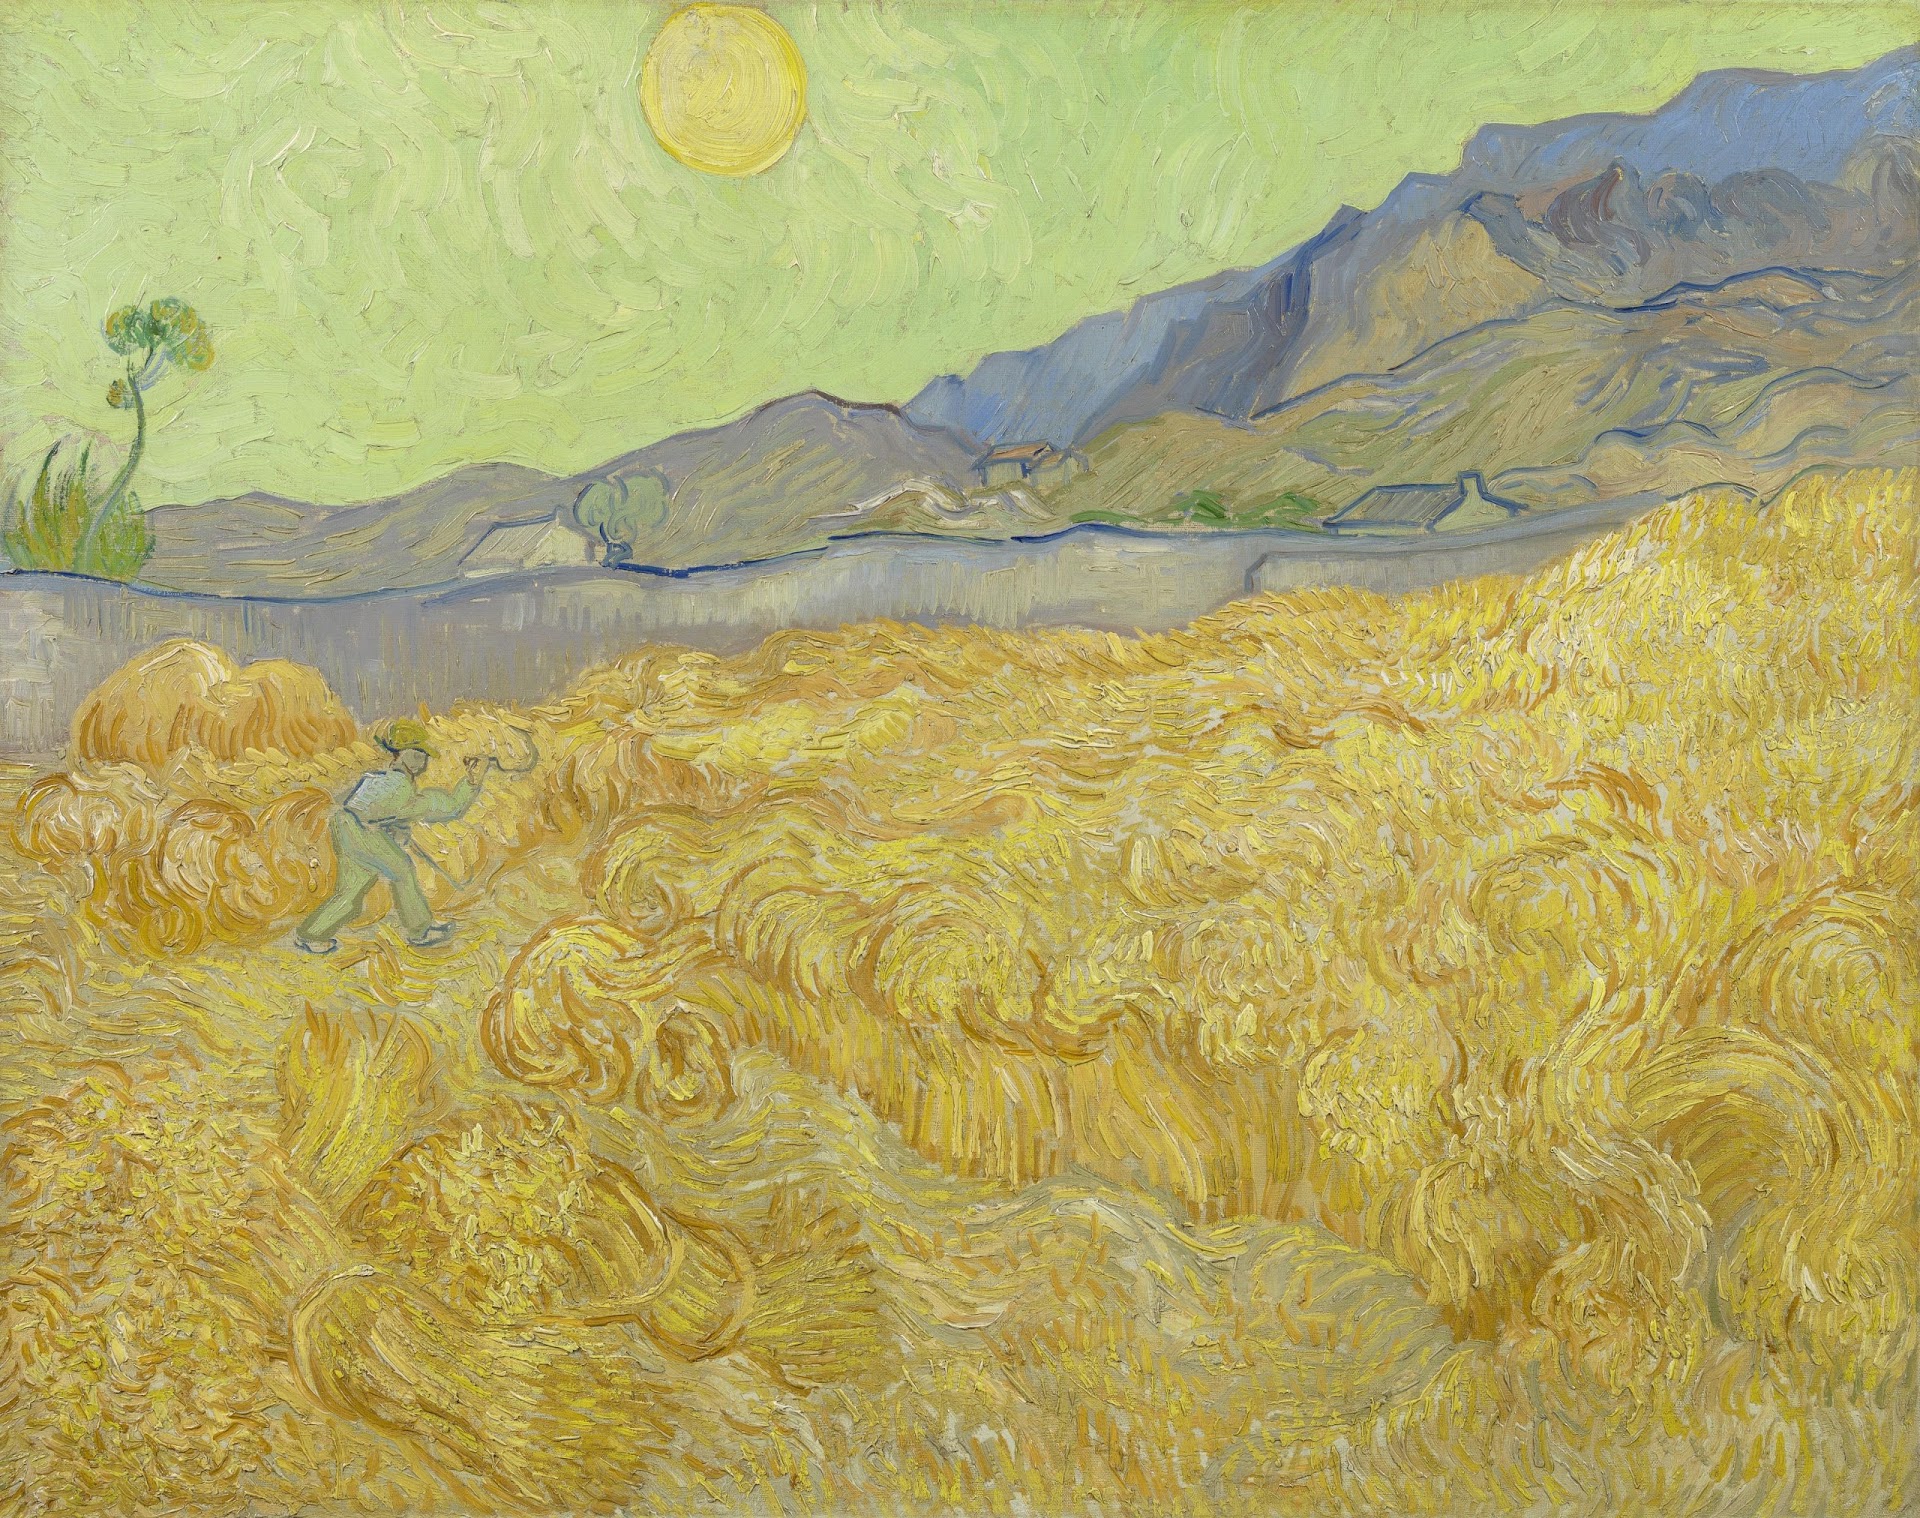 Nearly 1,000 Paintings & Drawings by Vincent van Gogh Now Digitized and